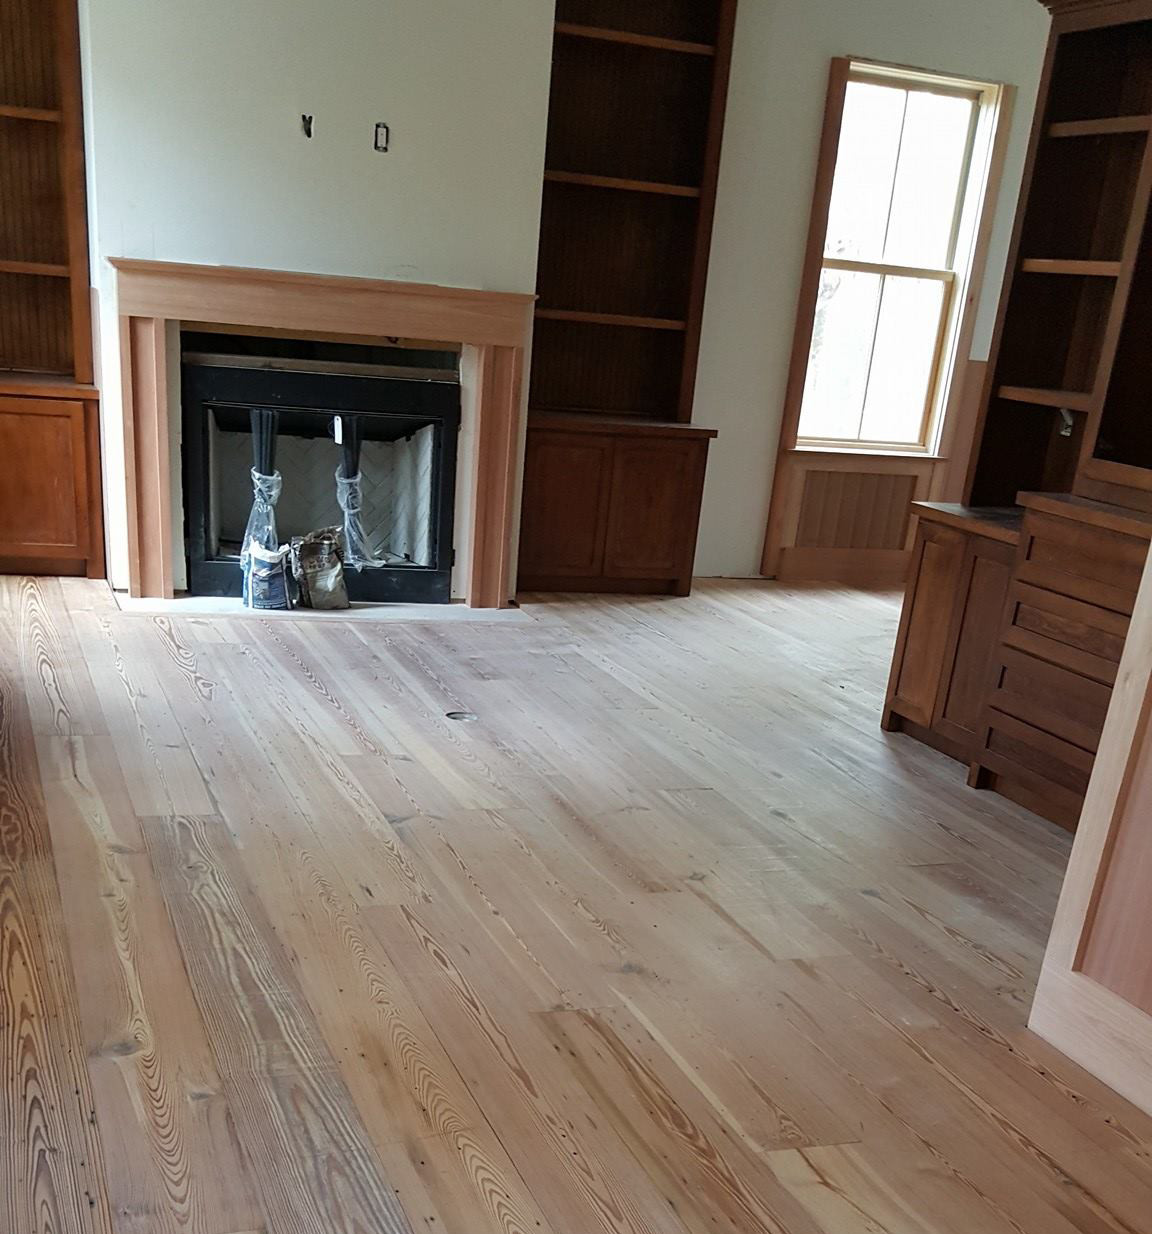 17 Elegant Hardwood Flooring Per Square Foot Installed 2024 free download hardwood flooring per square foot installed of olde savannah hardwood flooring throughout sand and refinish existing floors call for a free estimate